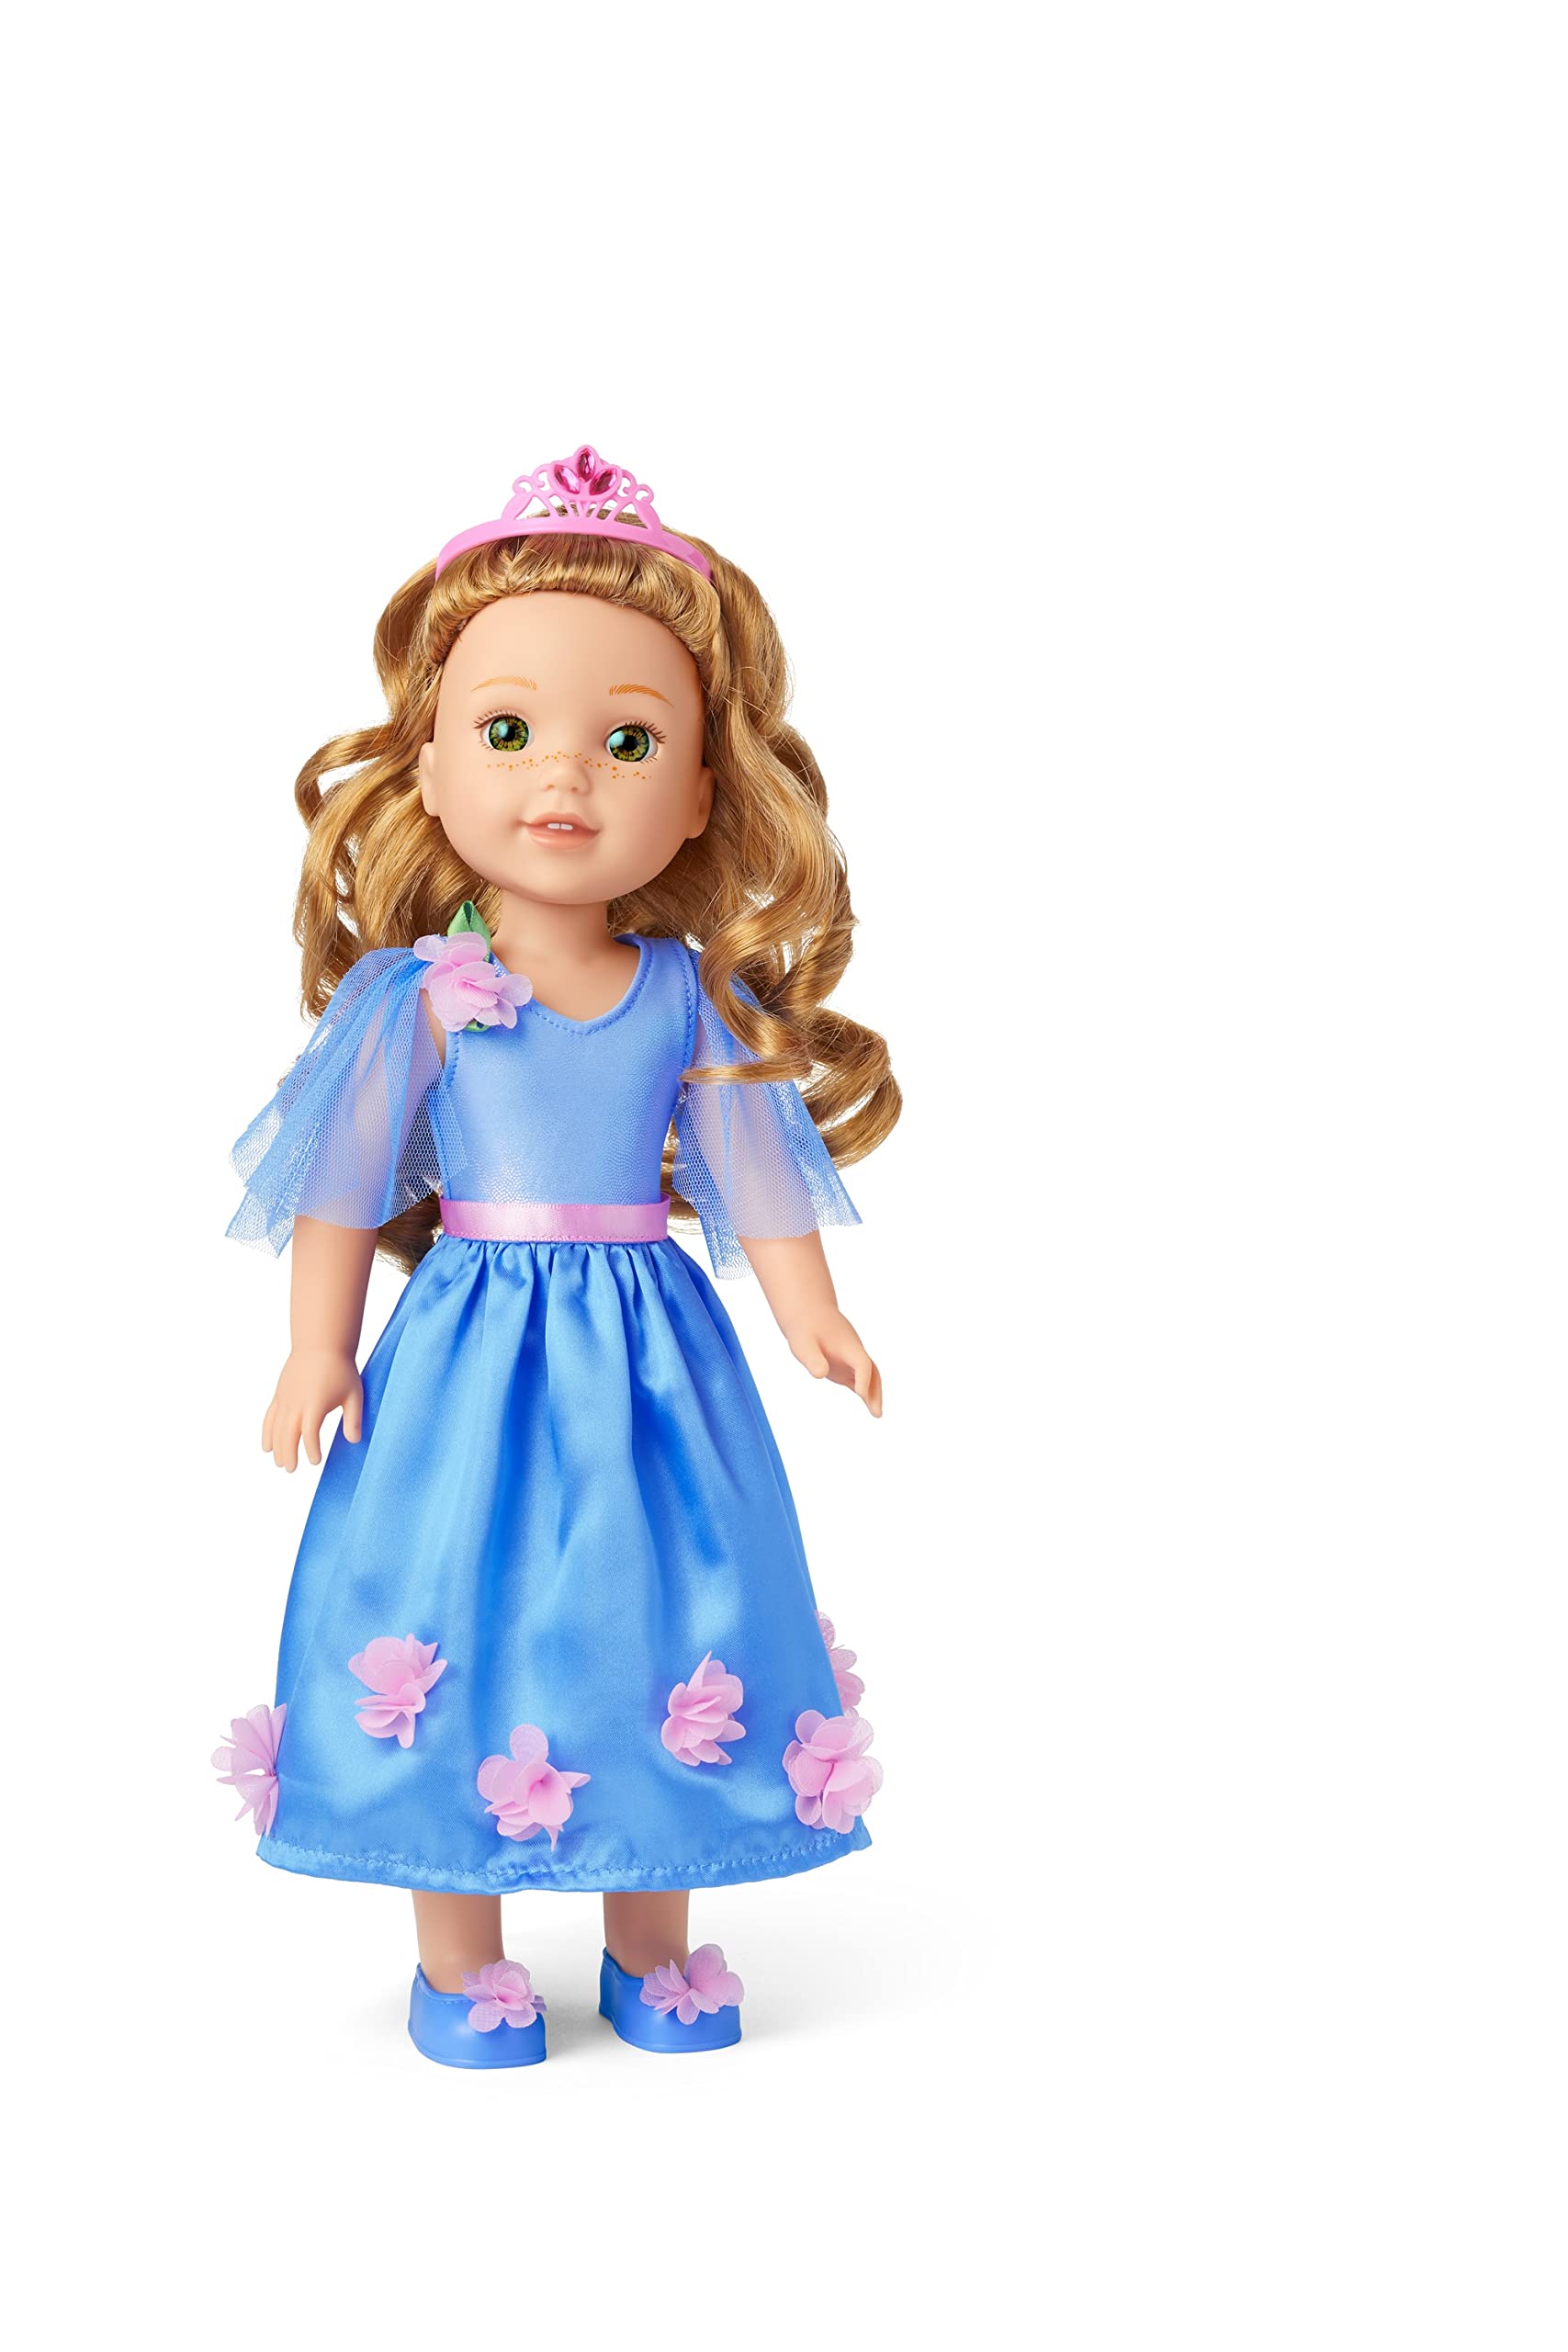 American Girl Wellie Wishers Princess in Bloom Outfit